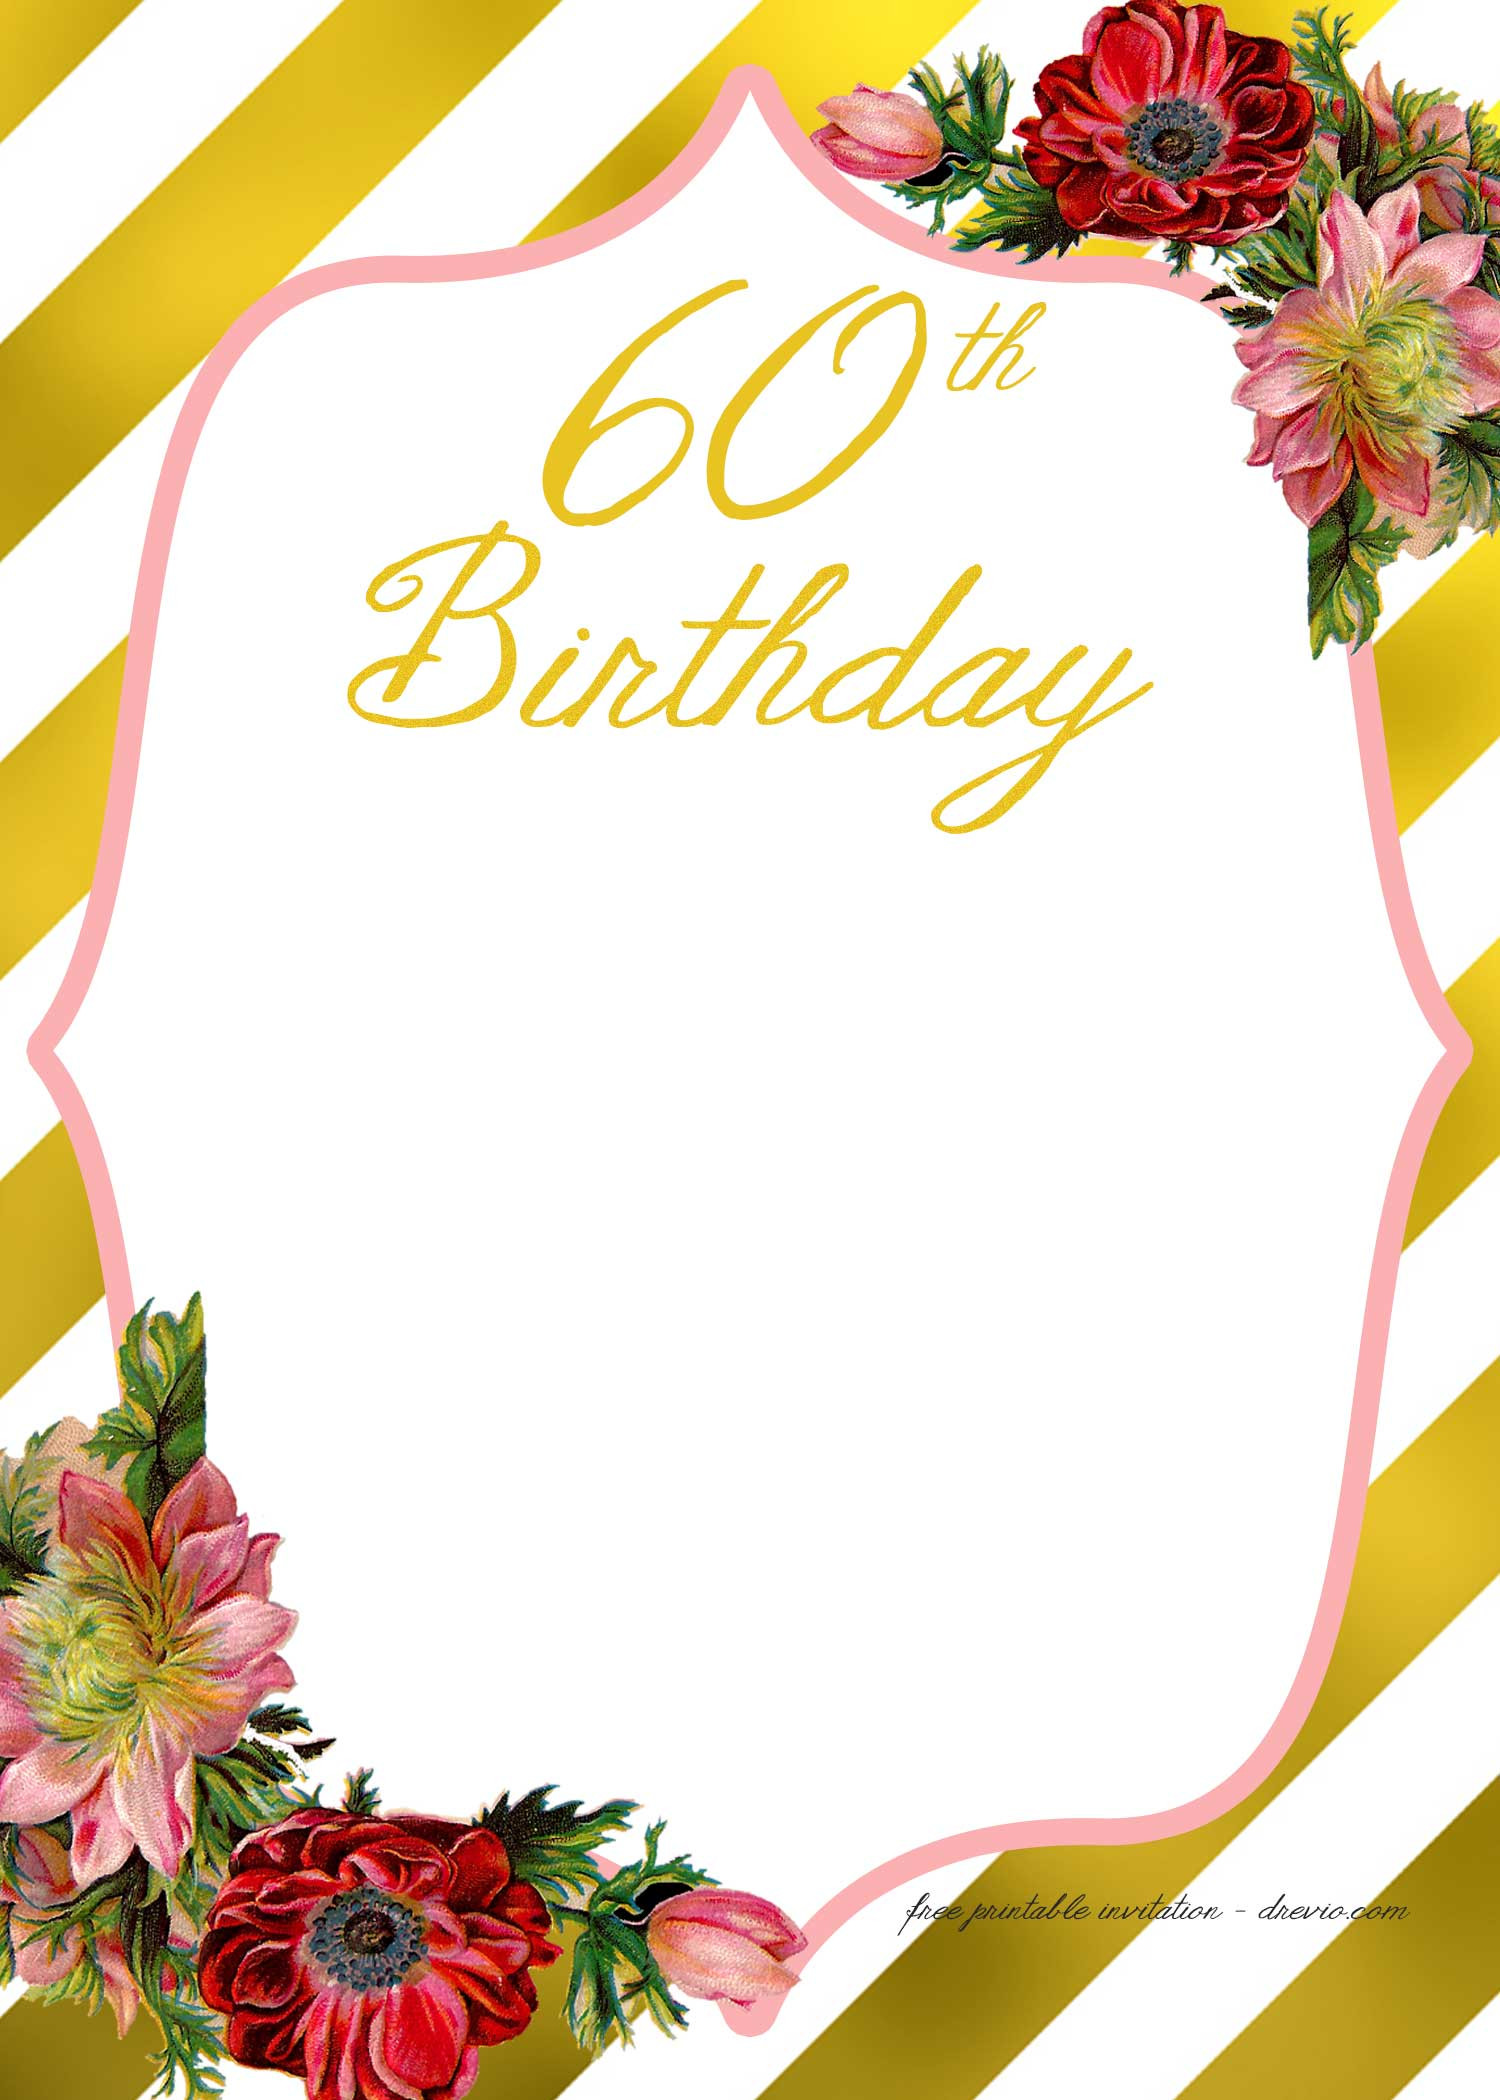 Birthday Online Invitations
 Adult Birthday Invitations Template for 50th years old